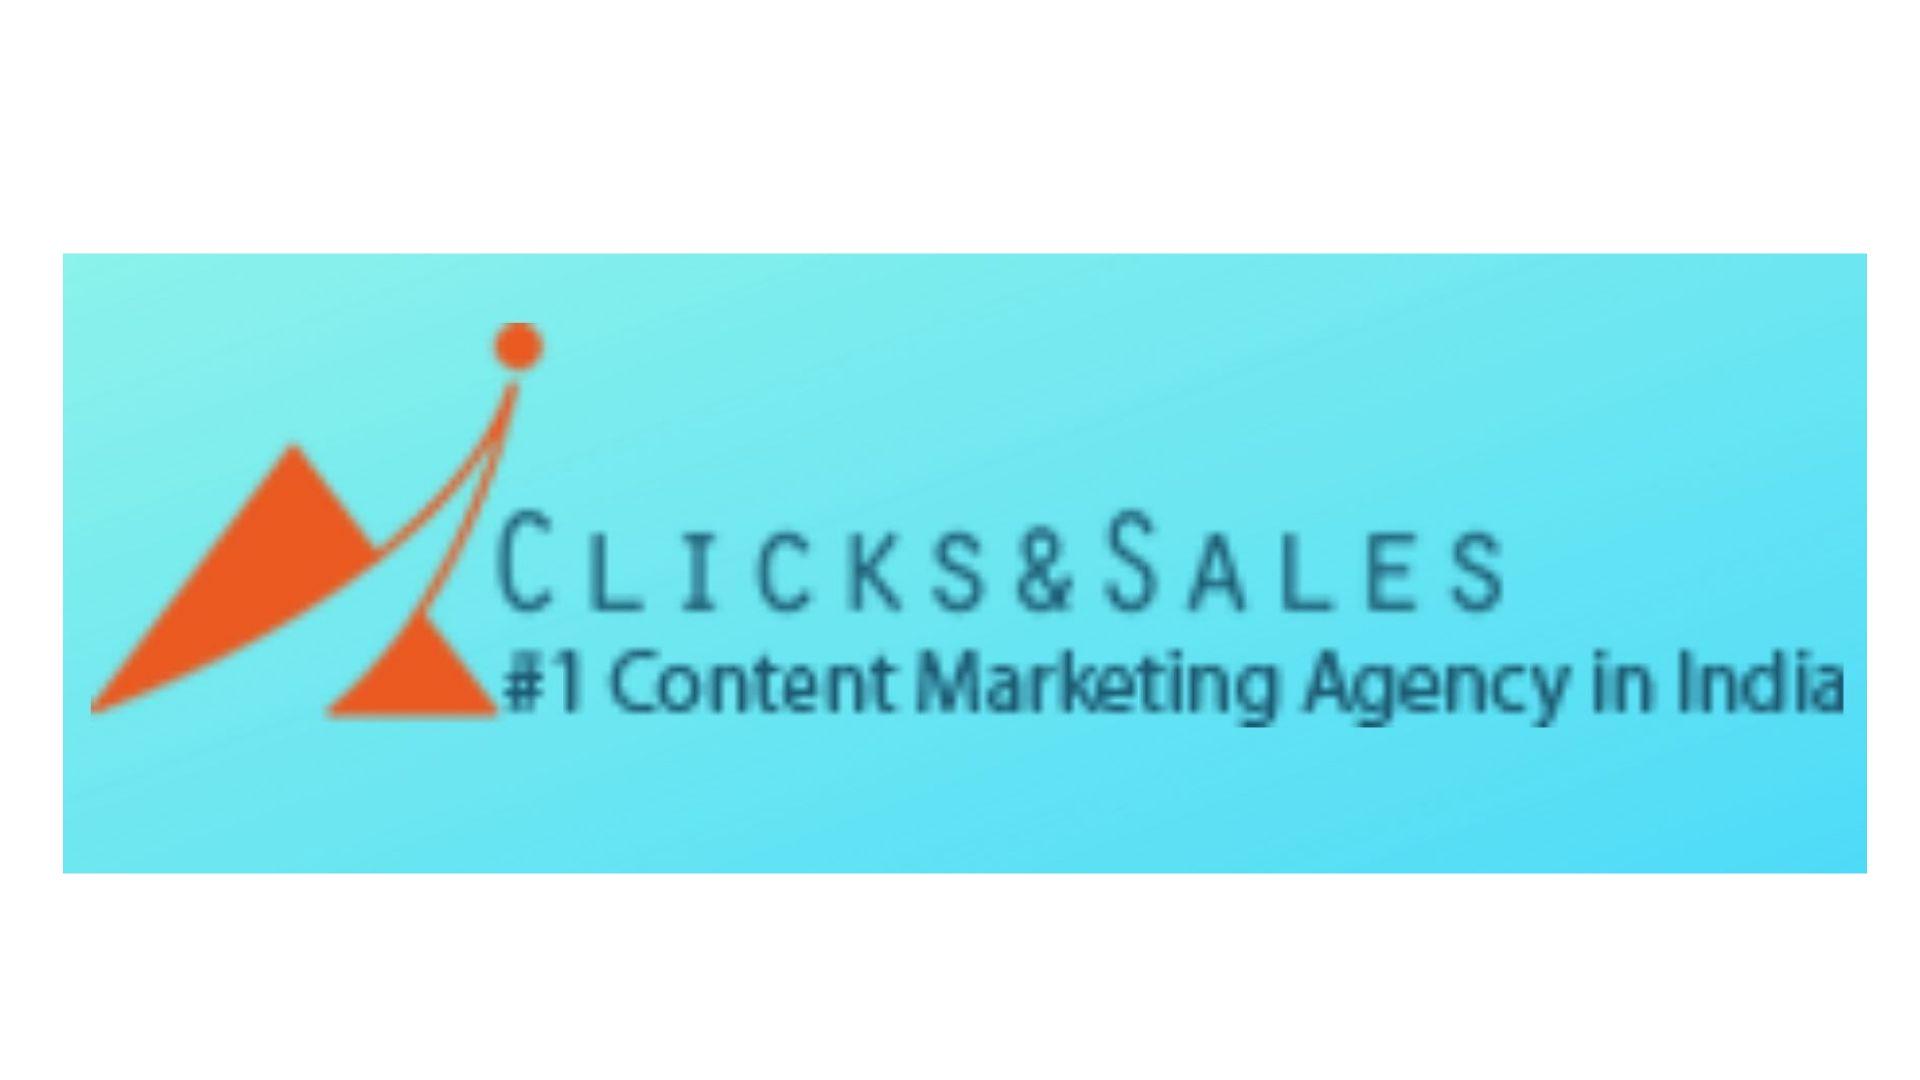 Clicks & Sales profile on Qualified.One